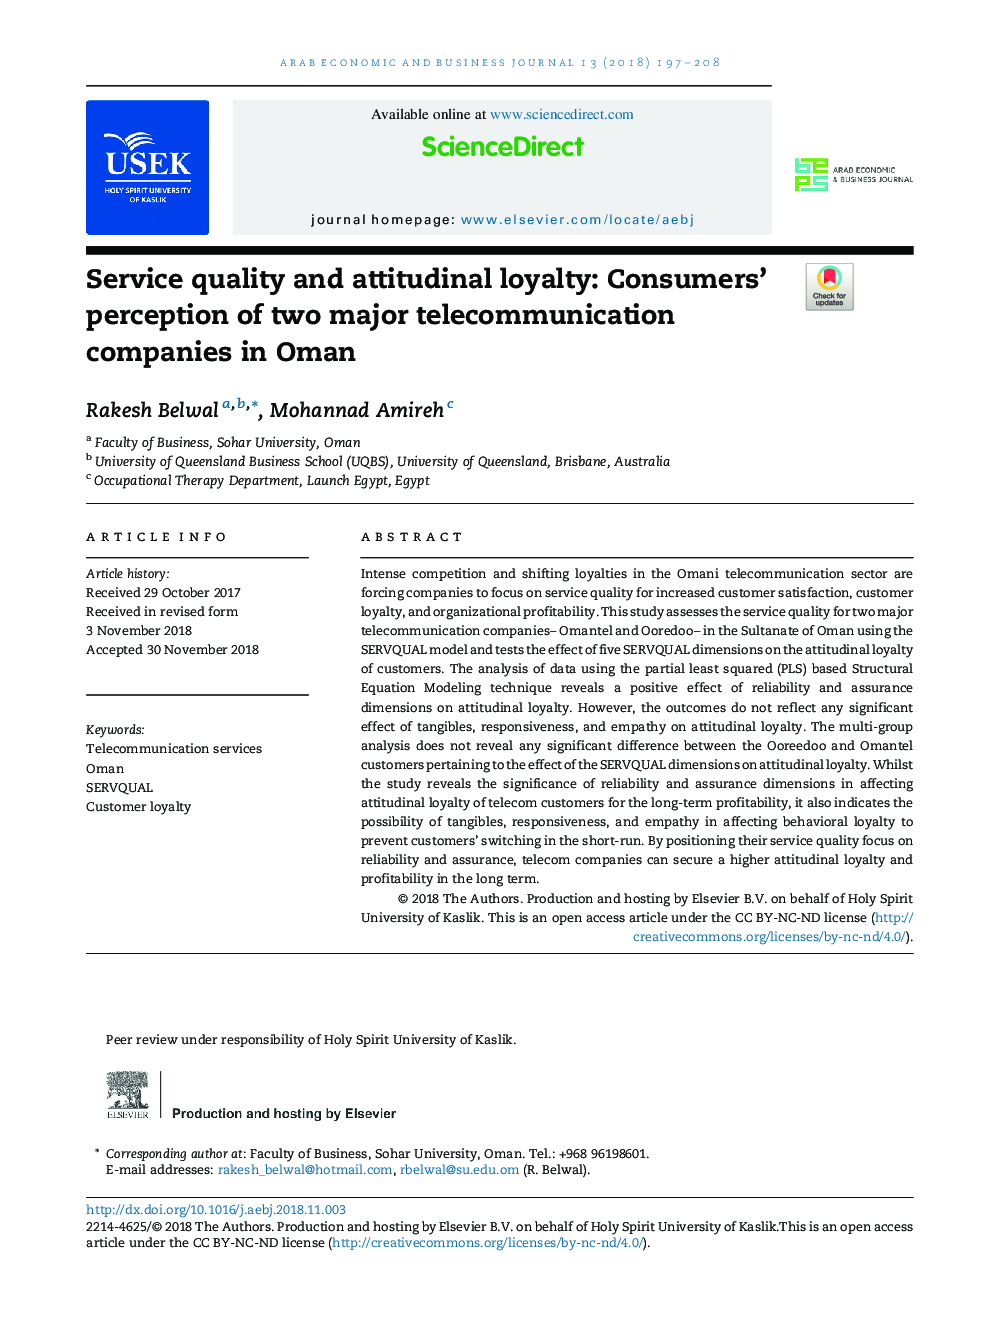 Service quality and attitudinal loyalty: Consumers' perception of two major telecommunication companies in Oman